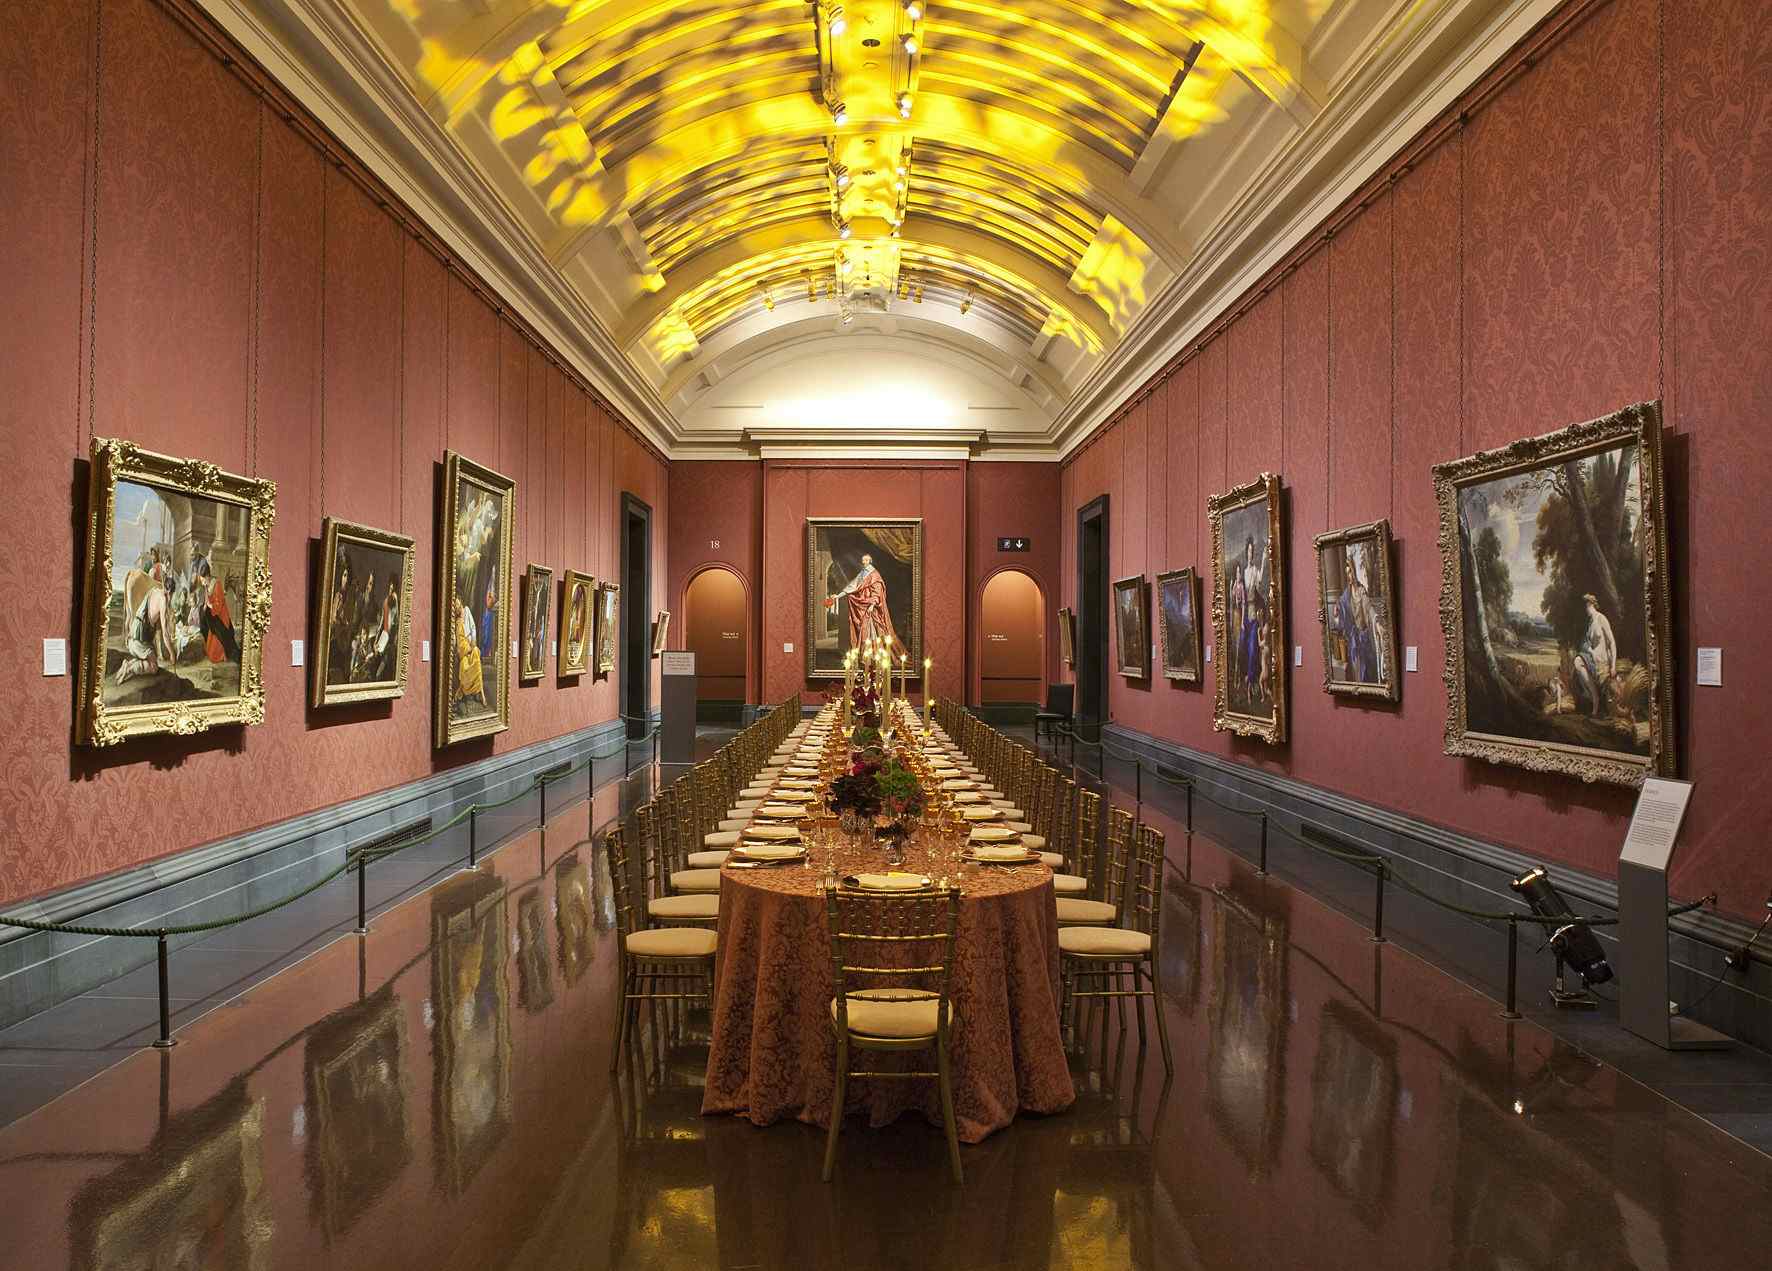 The YSL Room, The National Gallery